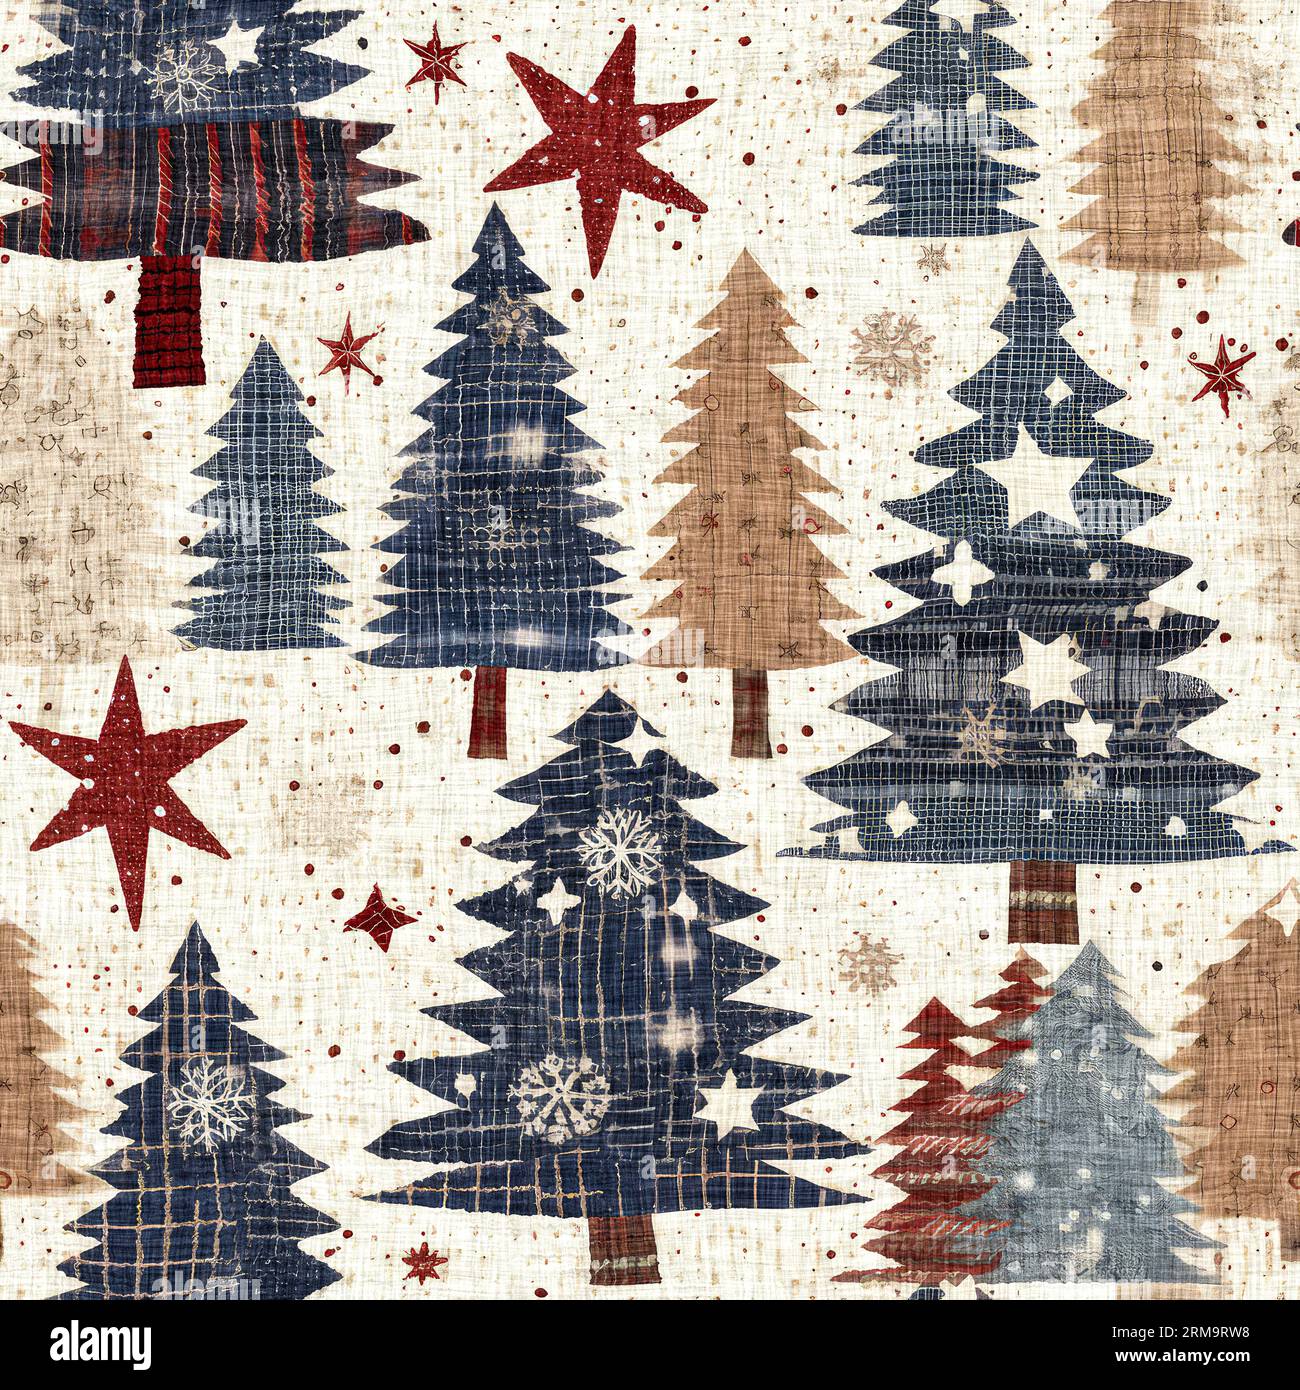 https://c8.alamy.com/comp/2RM9RW8/old-fashioned-christmas-tree-with-primitive-hand-sewing-fabric-effect-cozy-nostalgic-homespun-winter-hand-made-crafts-style-seamless-pattern-2RM9RW8.jpg